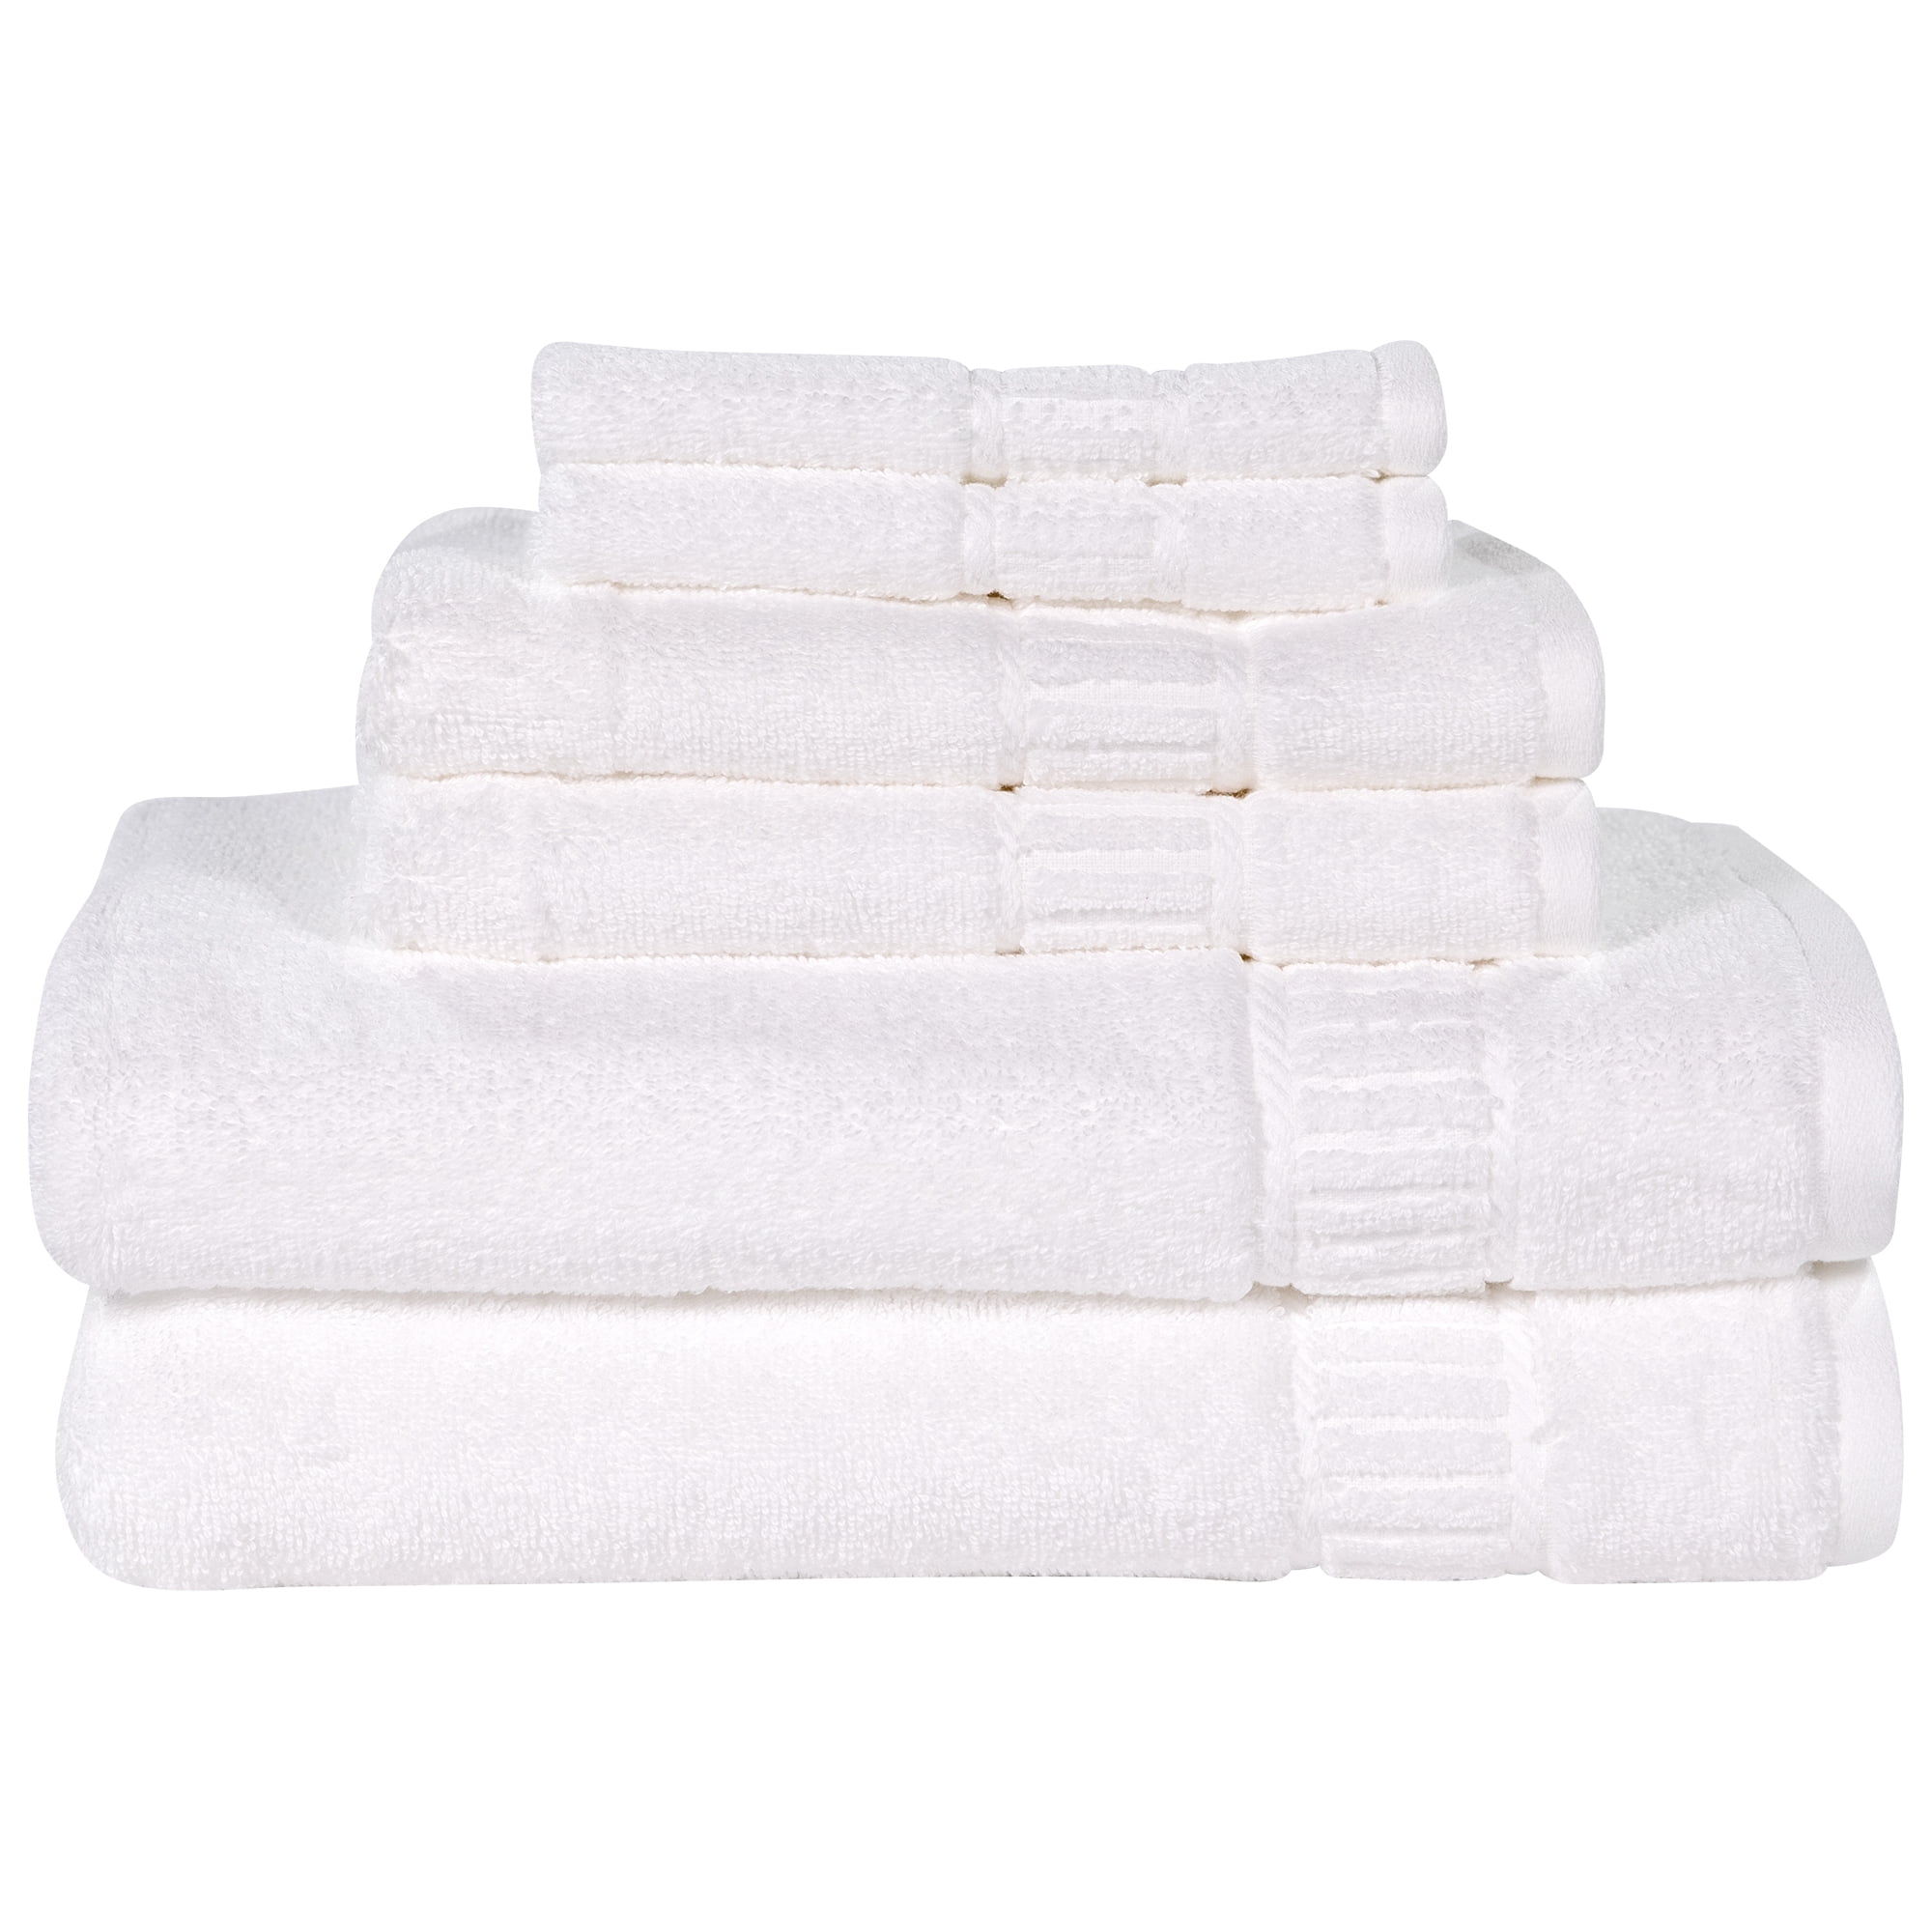 Introducing MyPillow 6-pack Dish Towel Set for $29.99 with promo